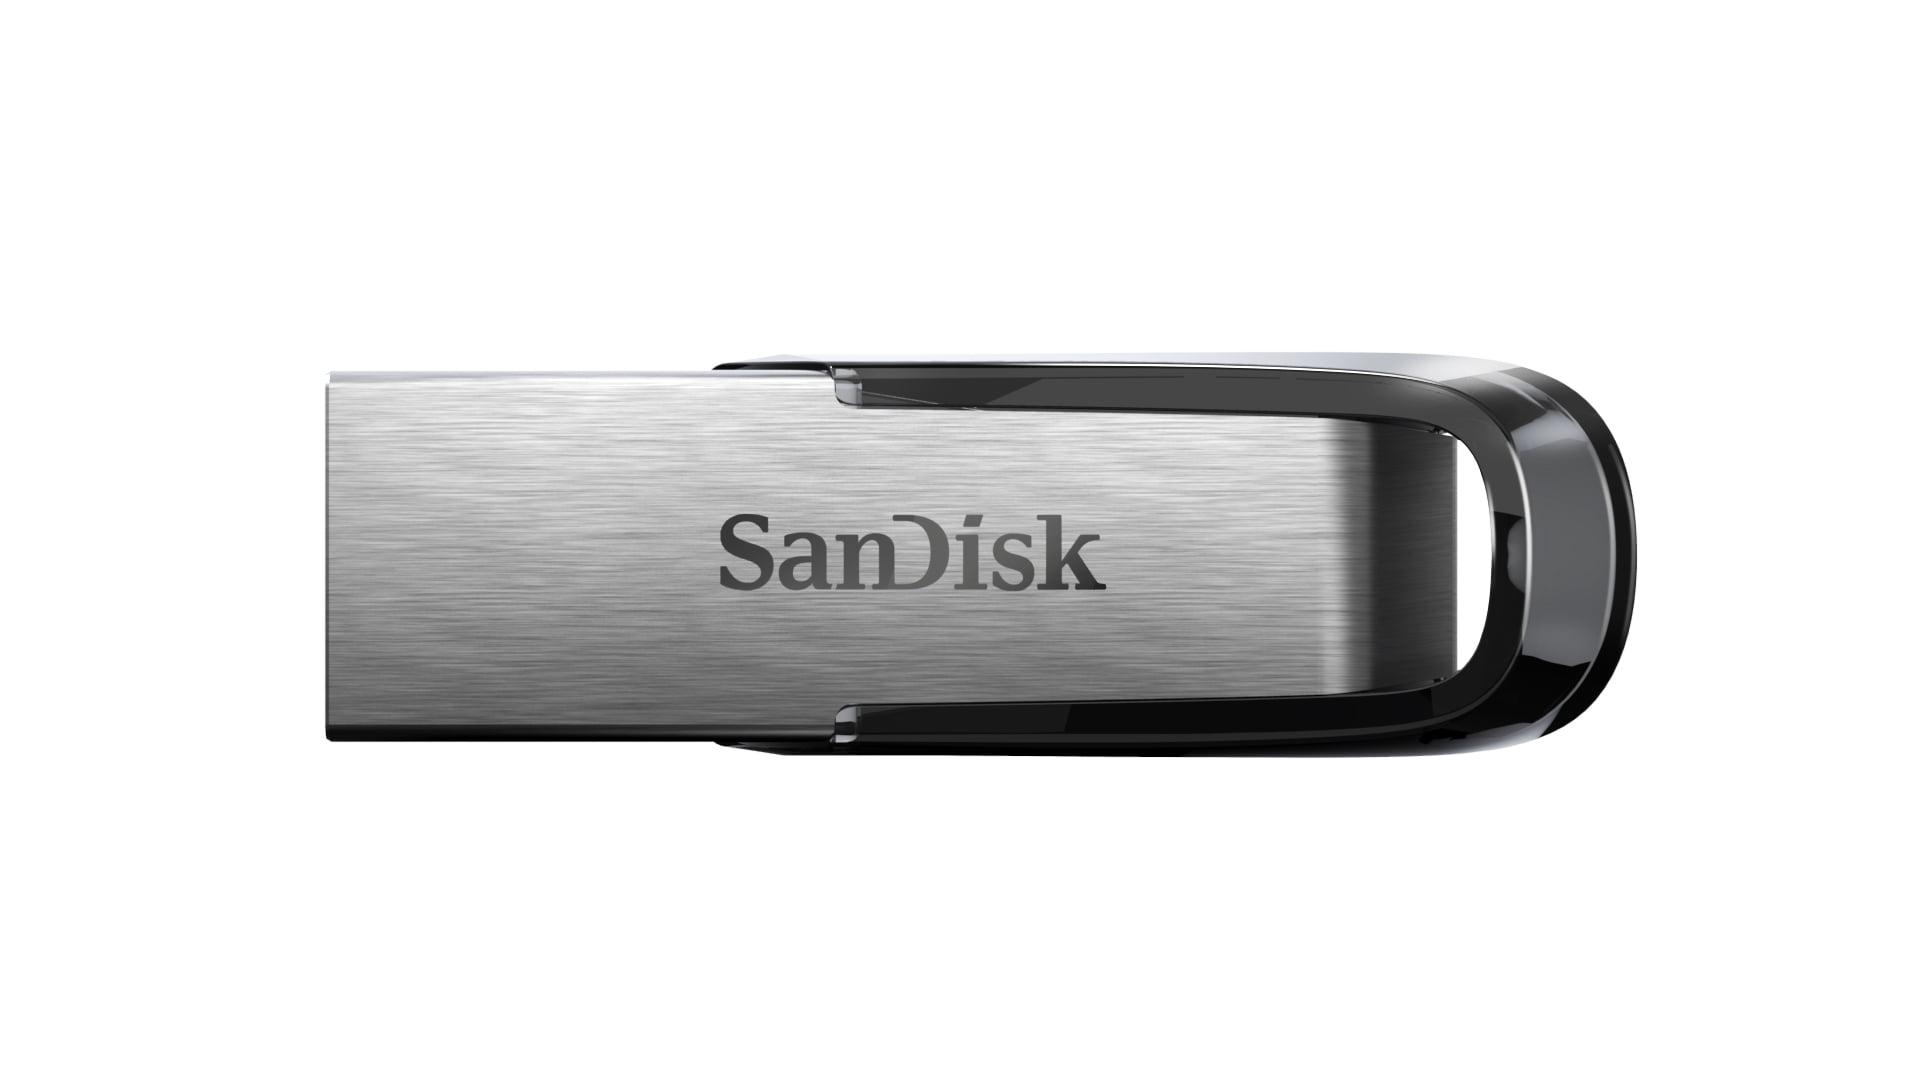 sandisk 256gb flash drive now only holds 32 gb